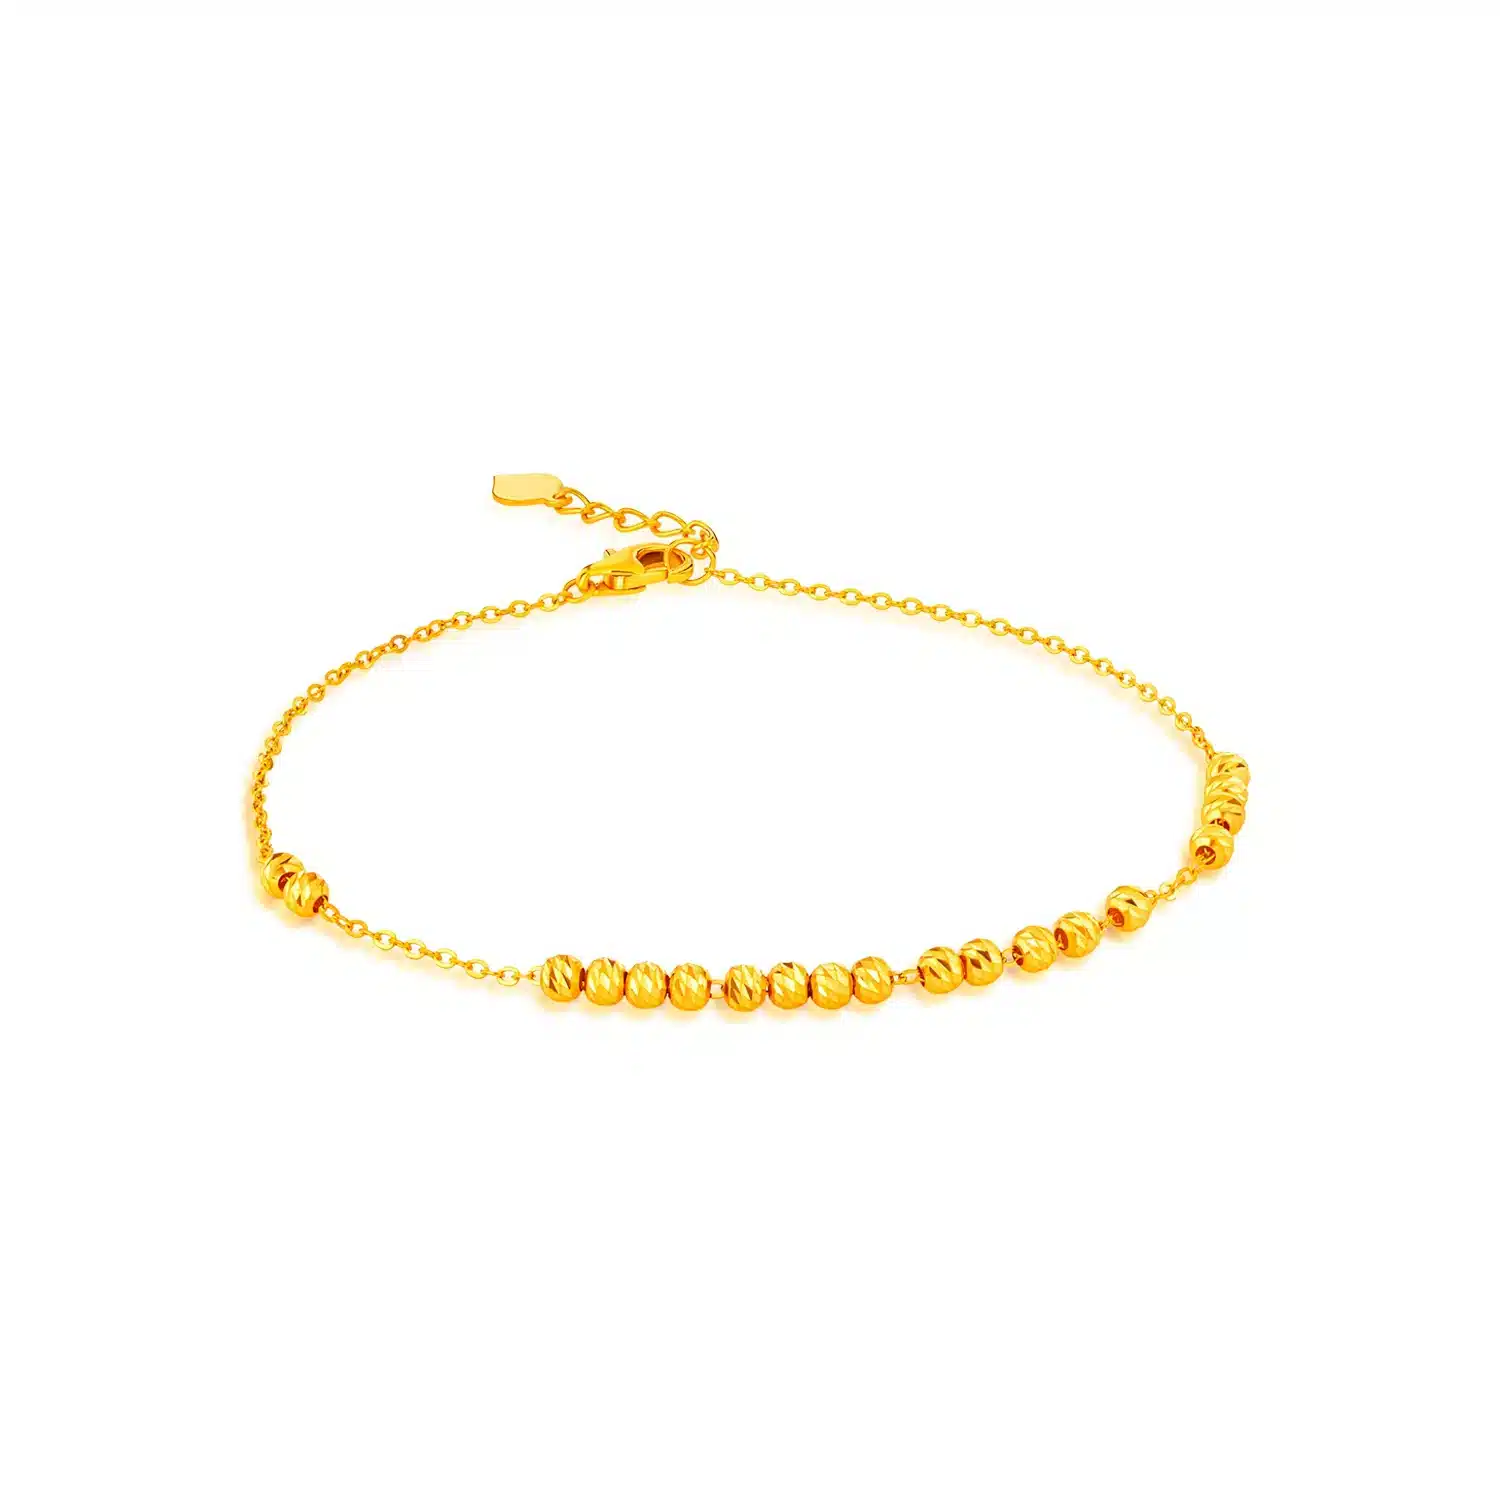 SK BRACELET FOR WOMEN TALIAdainty and delicate bracelet threaded with faceted-cut beads made in 916 gold